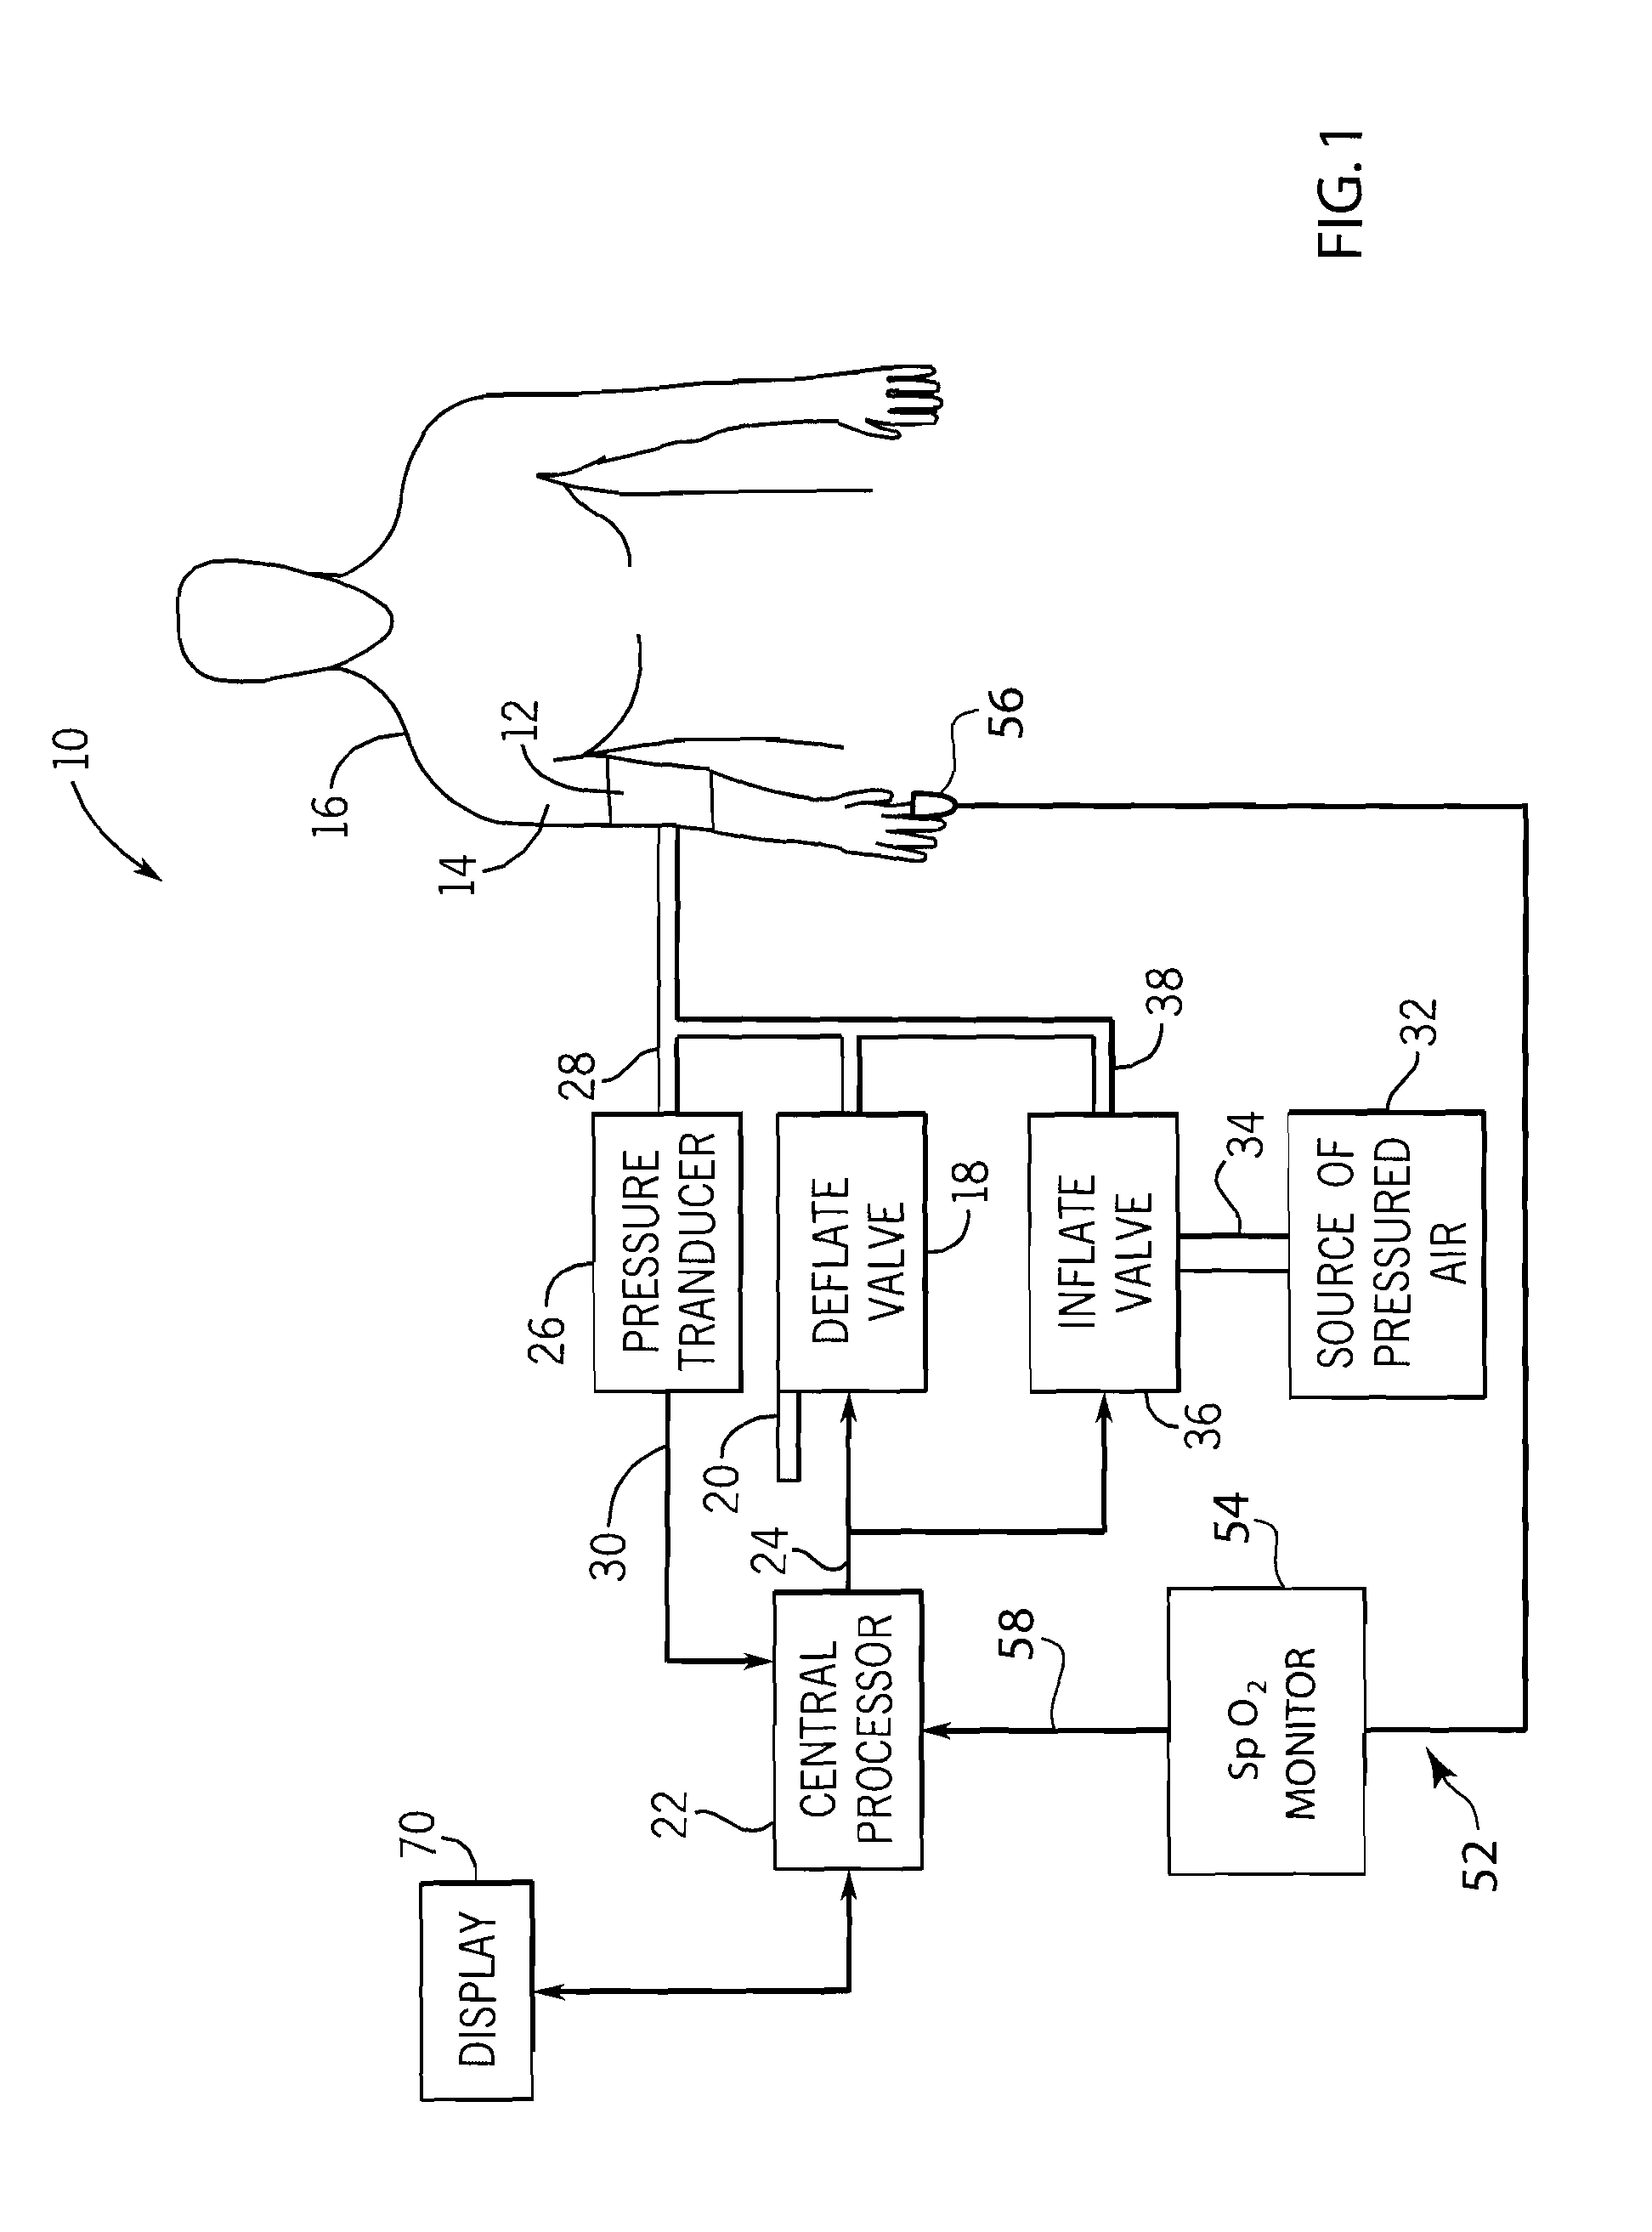 Method and system of determining nibp target inflation pressure using an sp02 plethysmograph signal